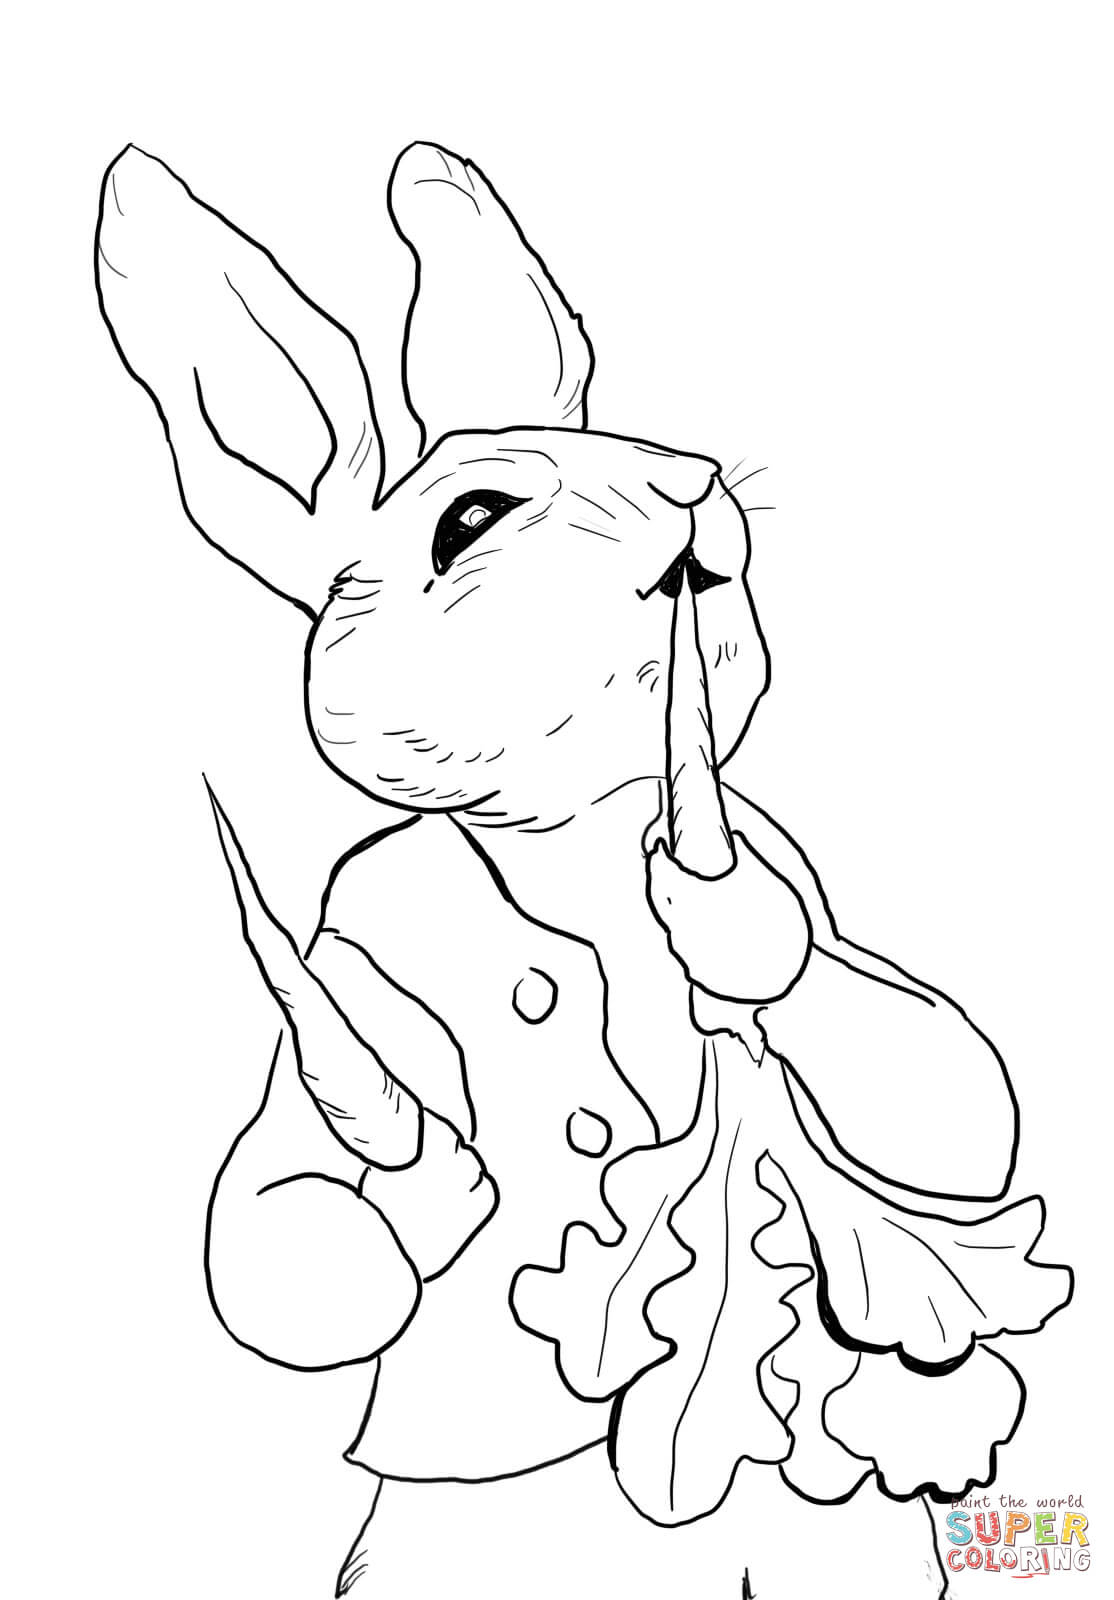 Peter Rabbit Eating Radishes Coloring Page | Free Printable Coloring - Free Printable Peter Rabbit Coloring Pages